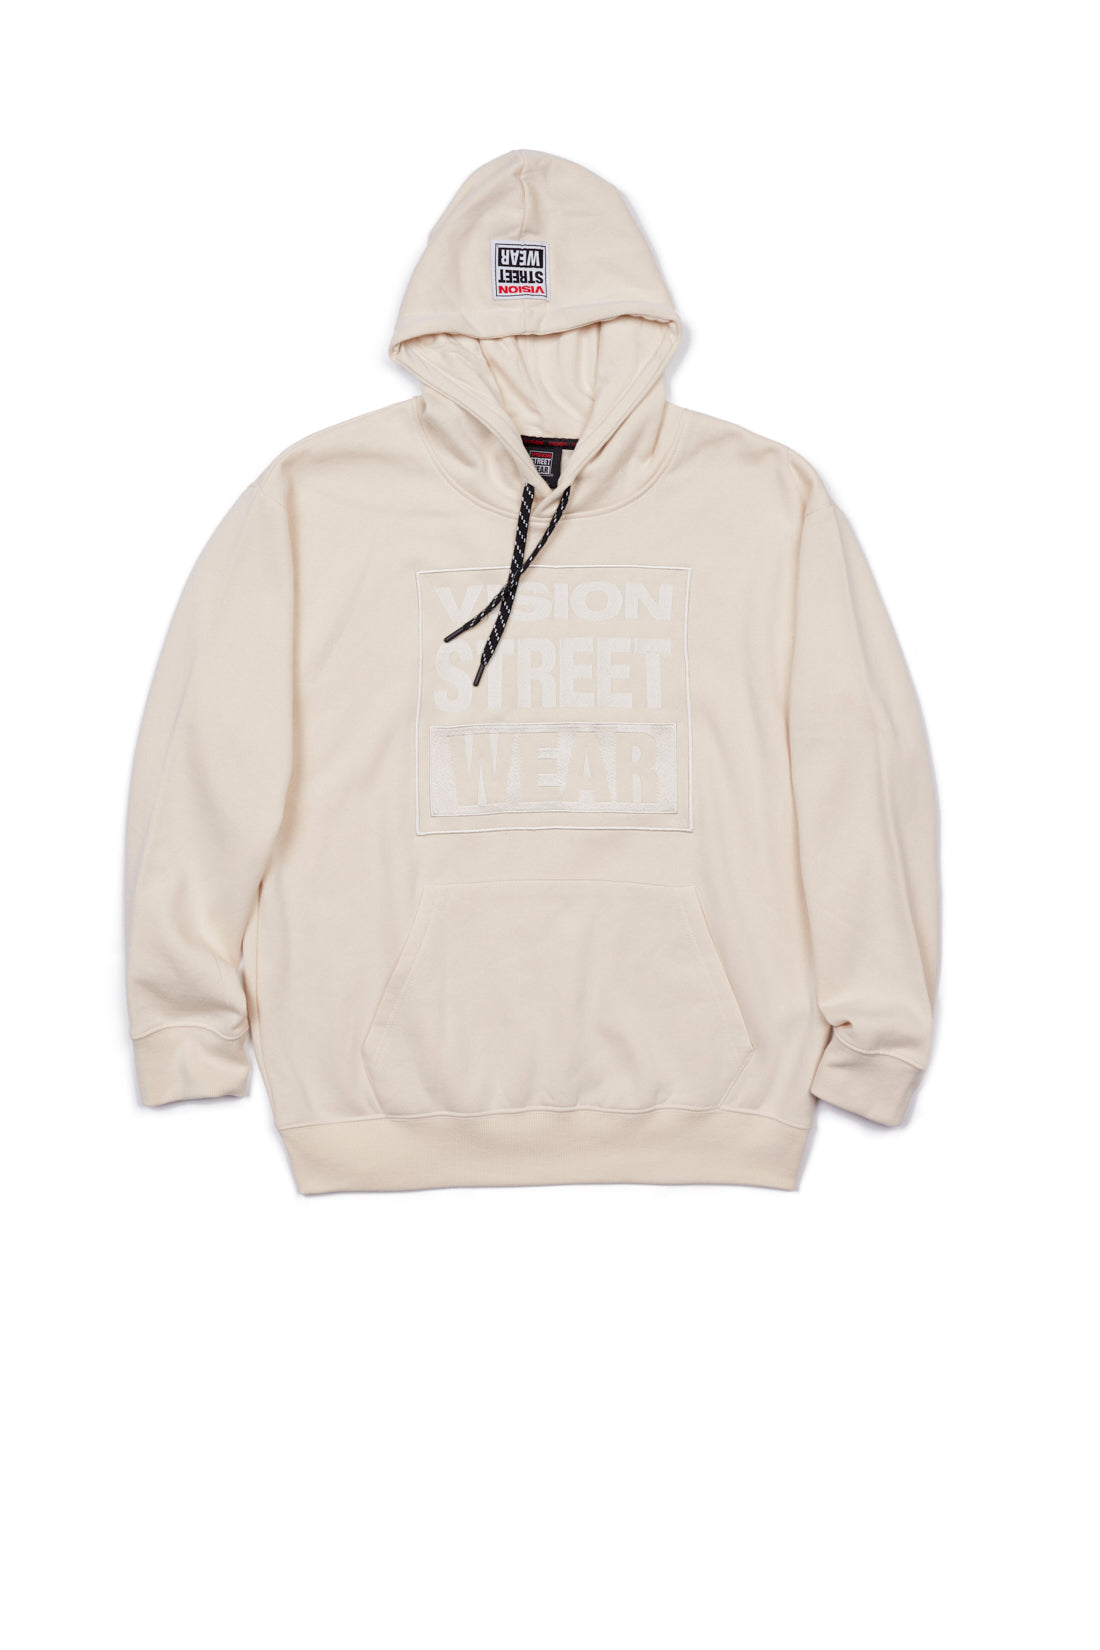 Vision Street Wear Front Embroided Logo Hoodie Bone